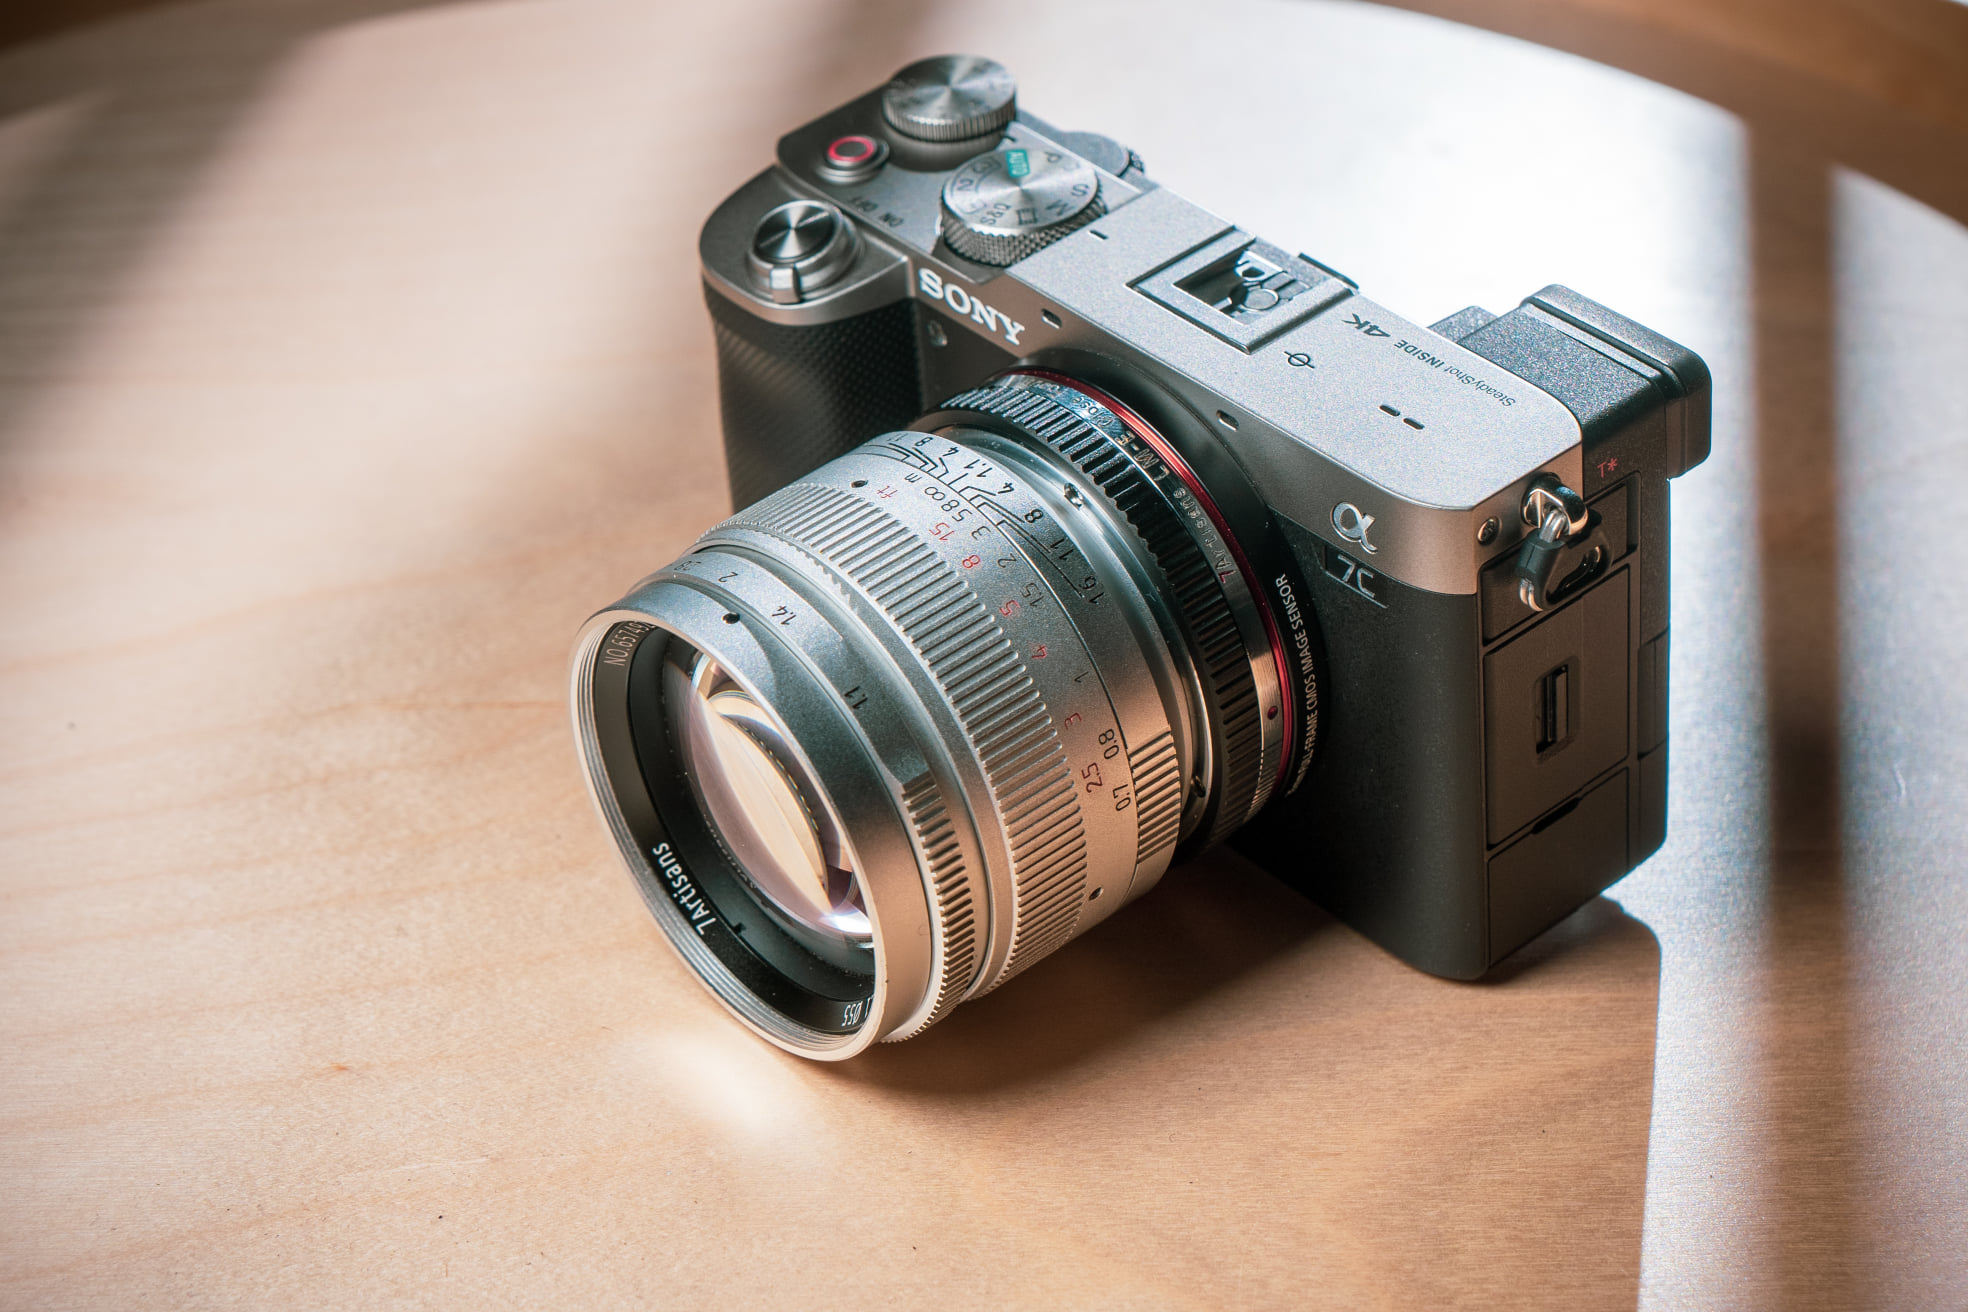 Nice pictures show the A7c with a whole set of lenses â sonyalpharumors